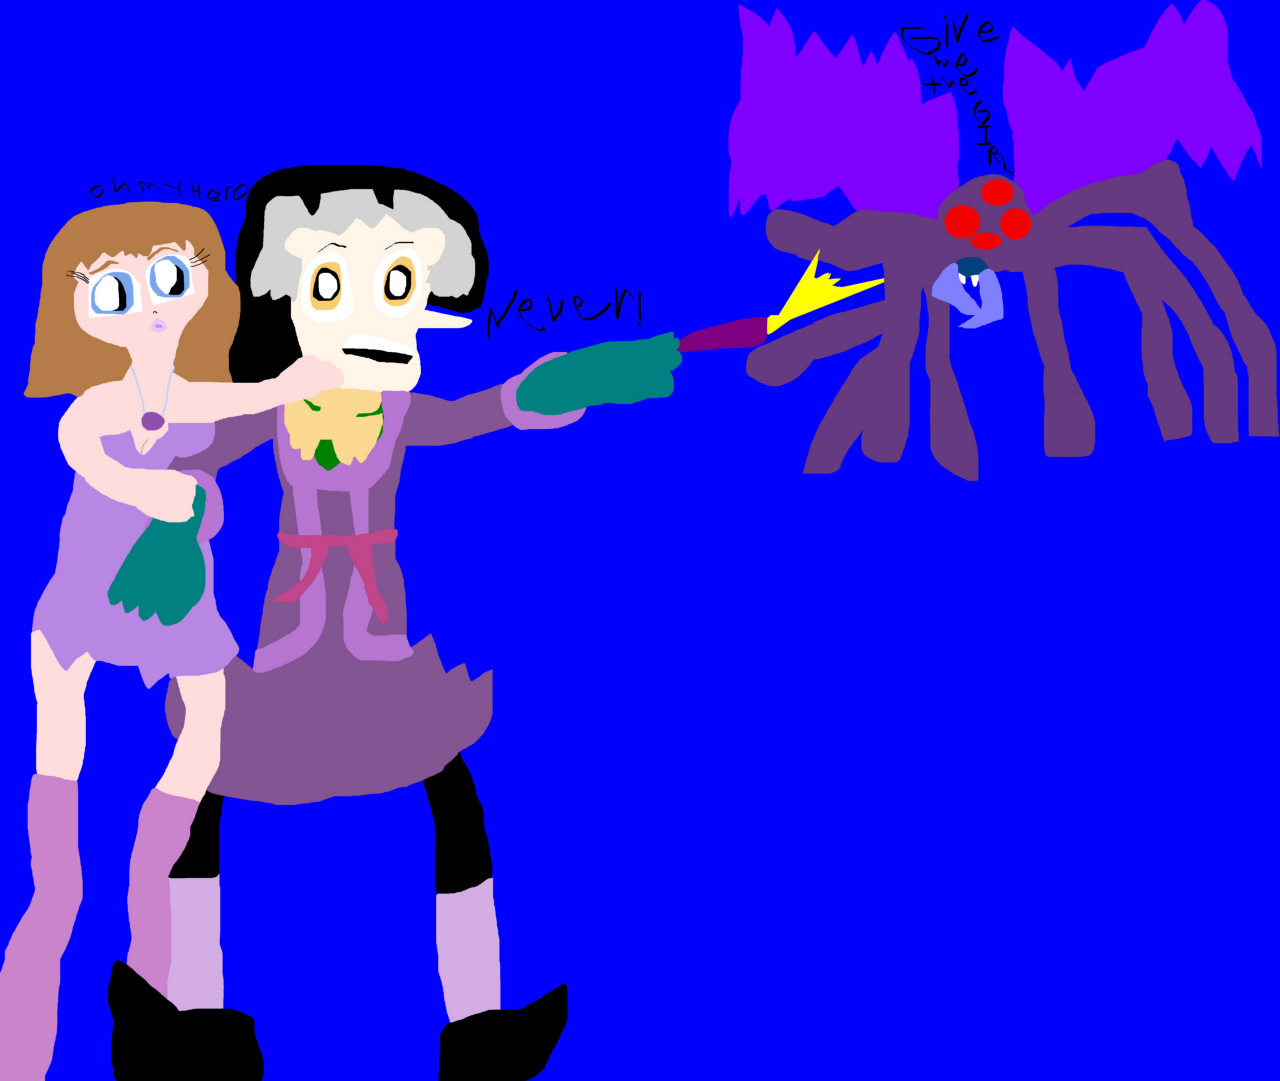 Cedric Protecting Sofia From A Creature MS Paint by Falconlobo